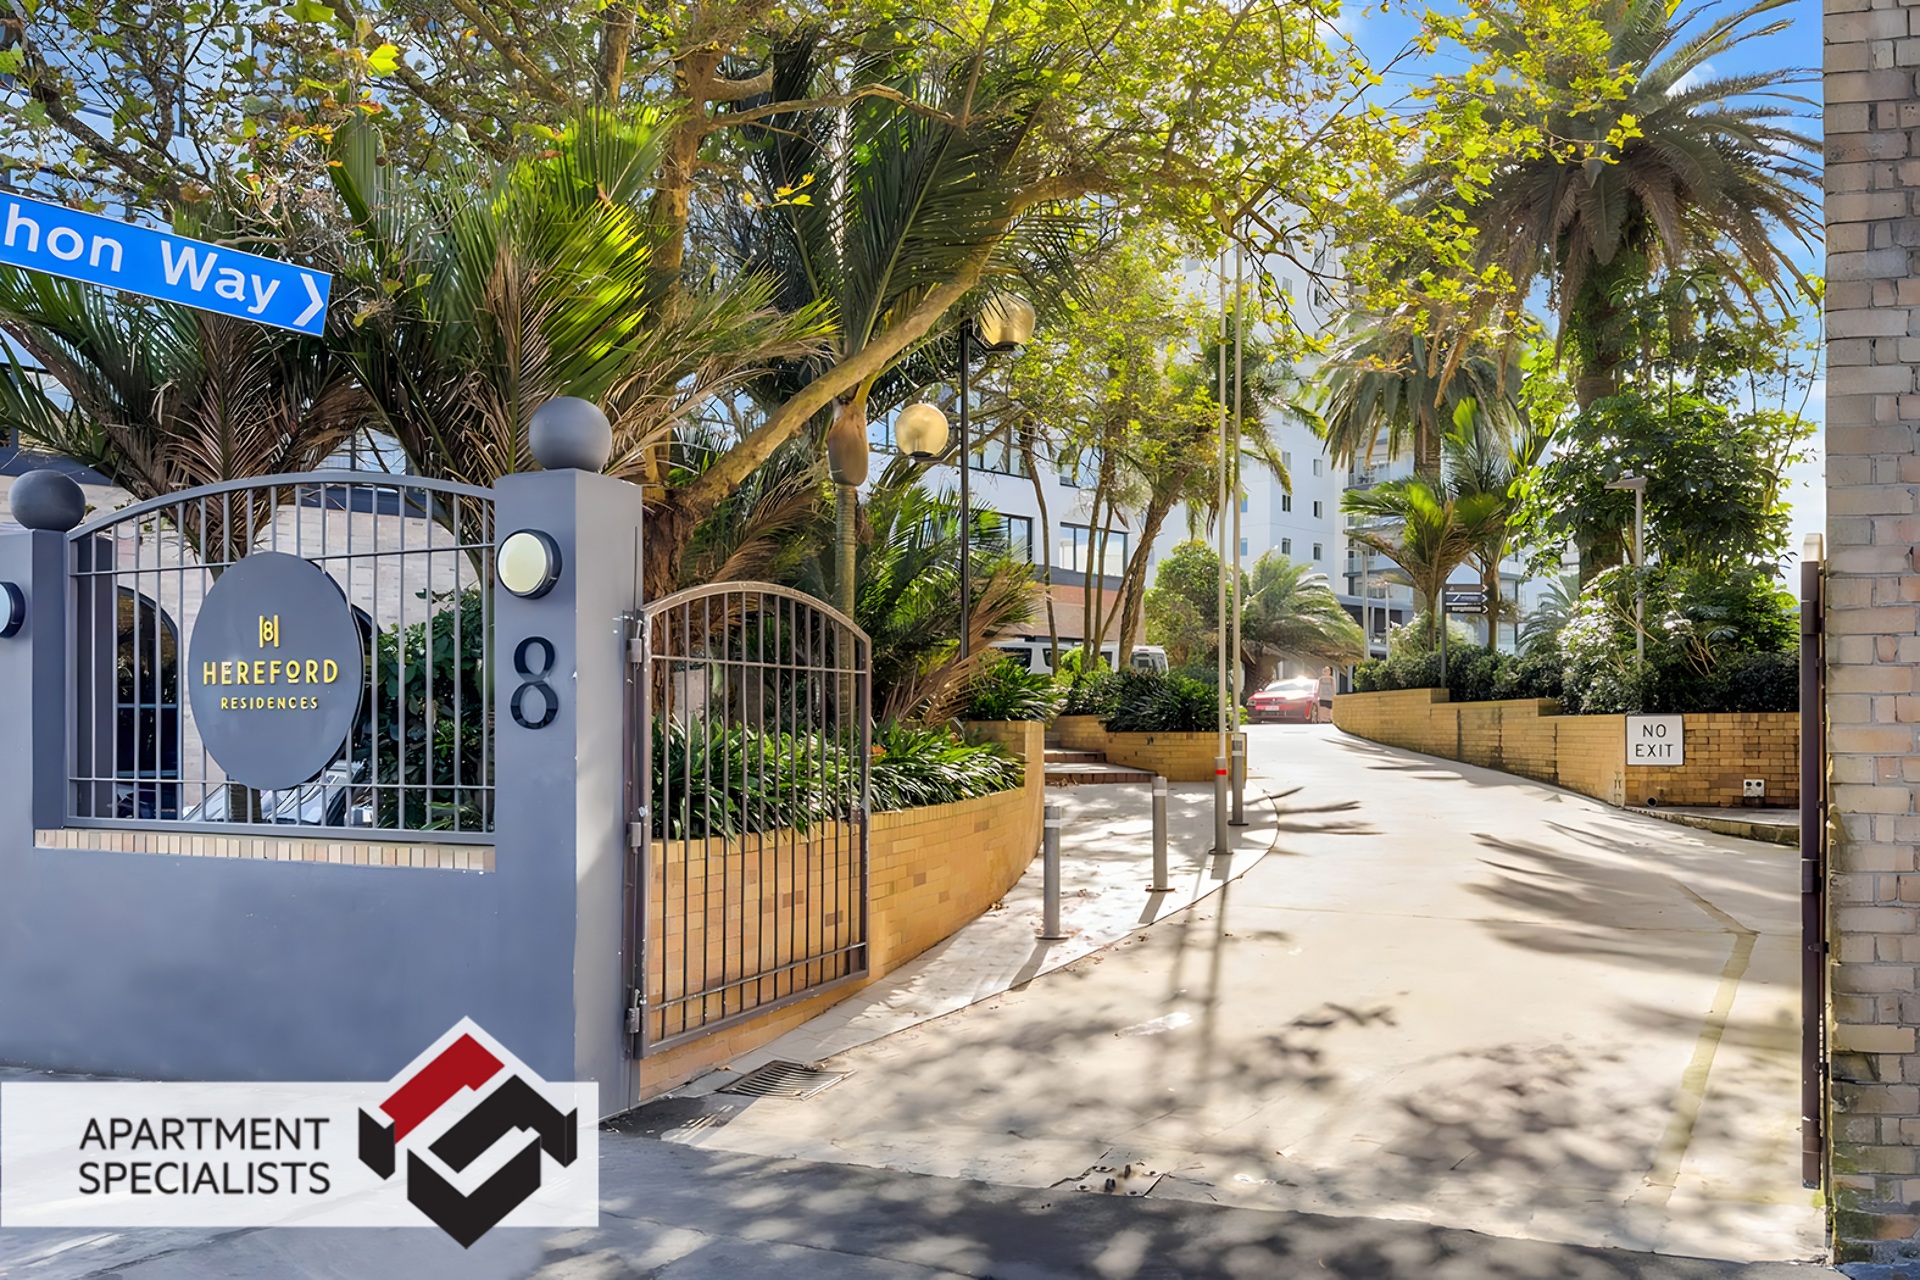 27 | 8 Hereford Street, Freemans Bay | Apartment Specialists